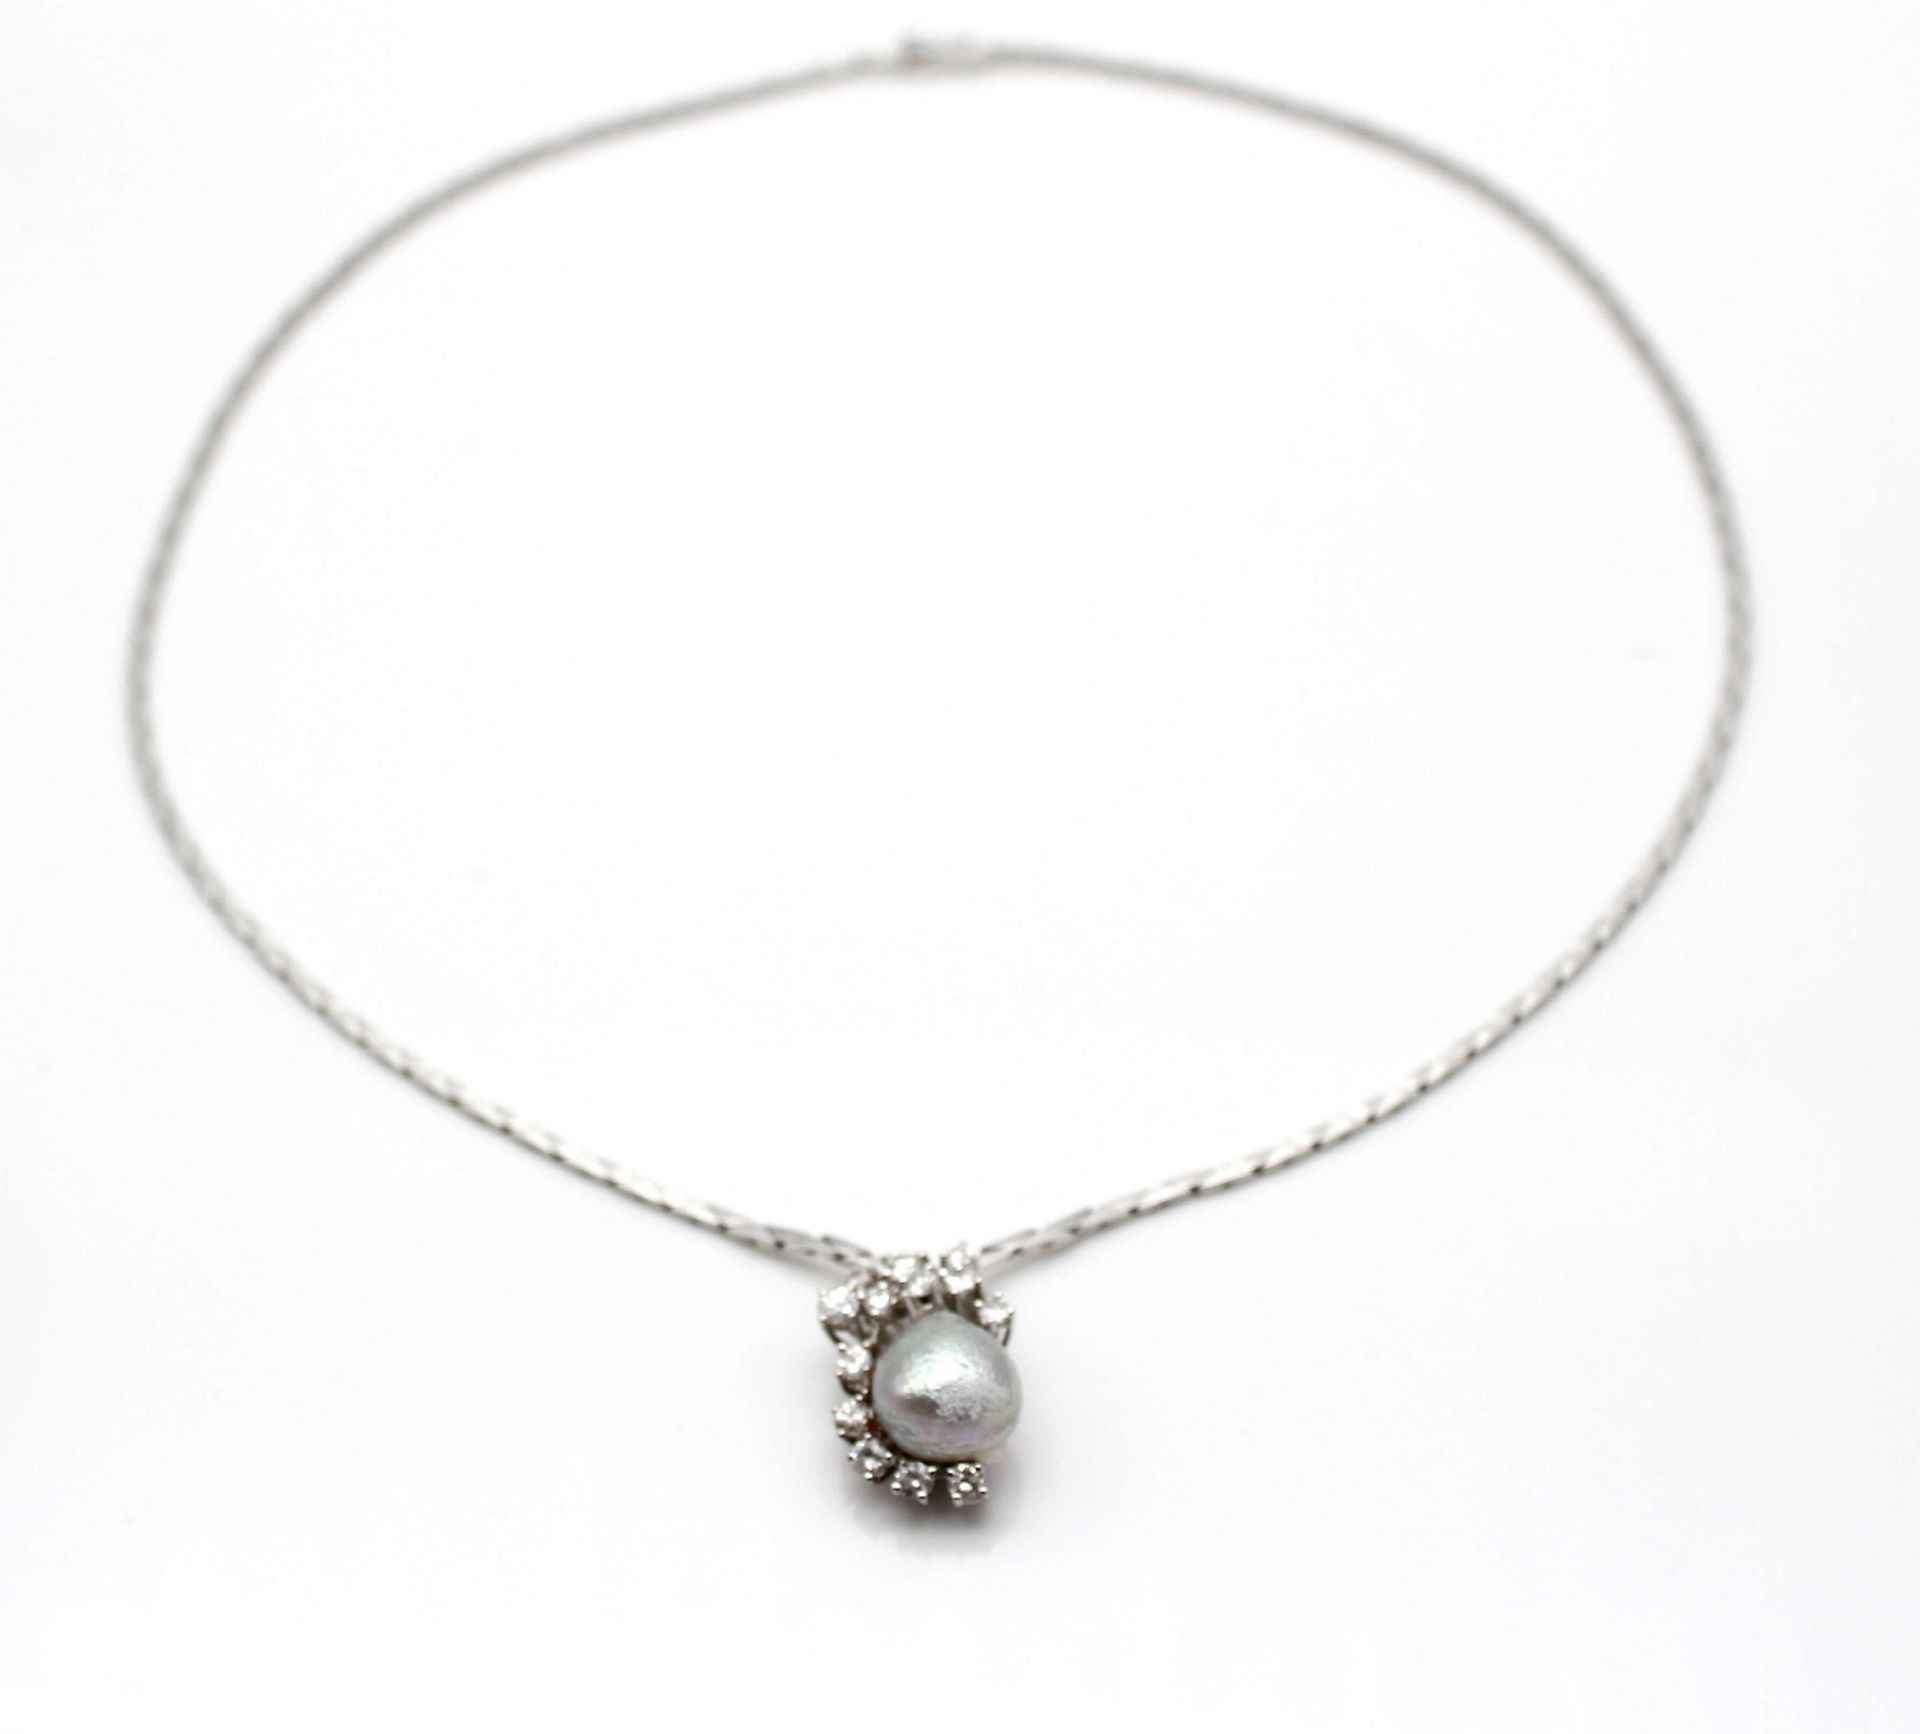 Necklace with cultured pearl and brilliants, total ca. 0,75 ct - Image 2 of 3